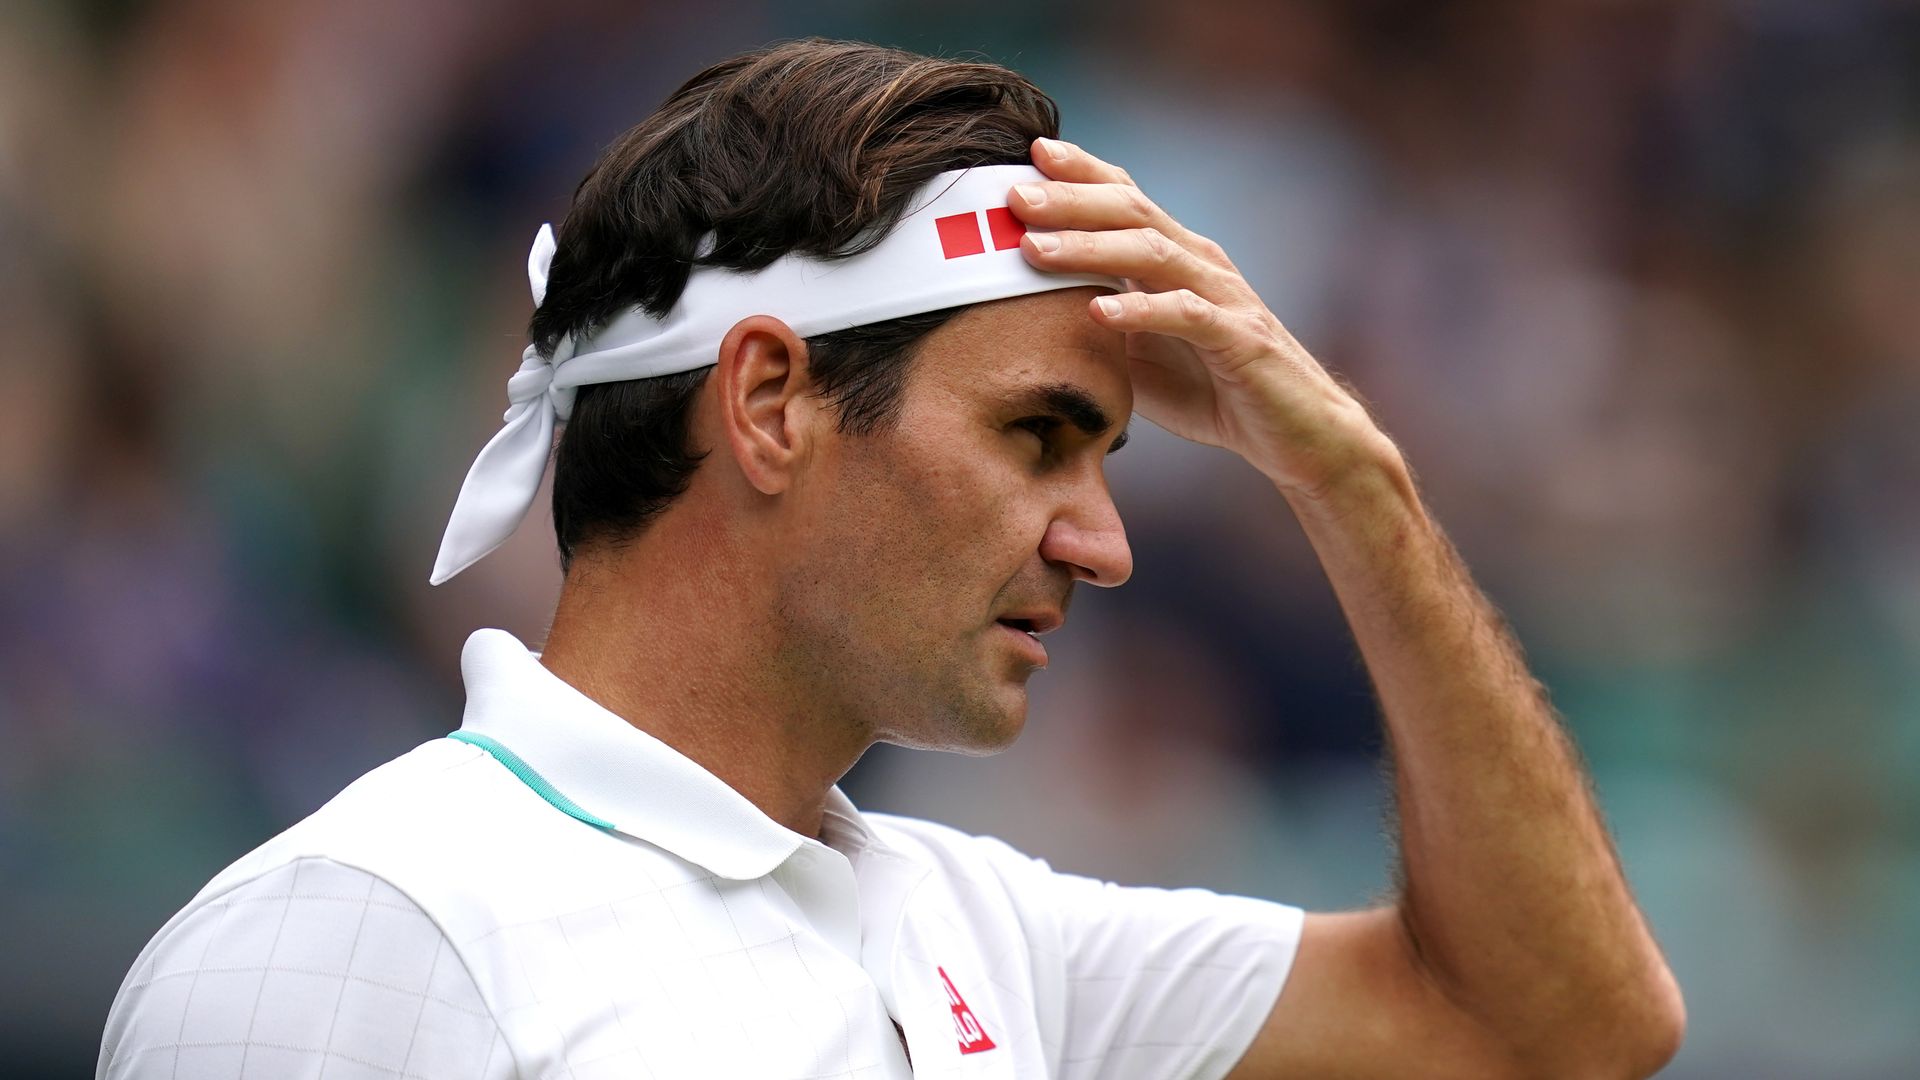 Federer to miss 'many months' due to knee surgery